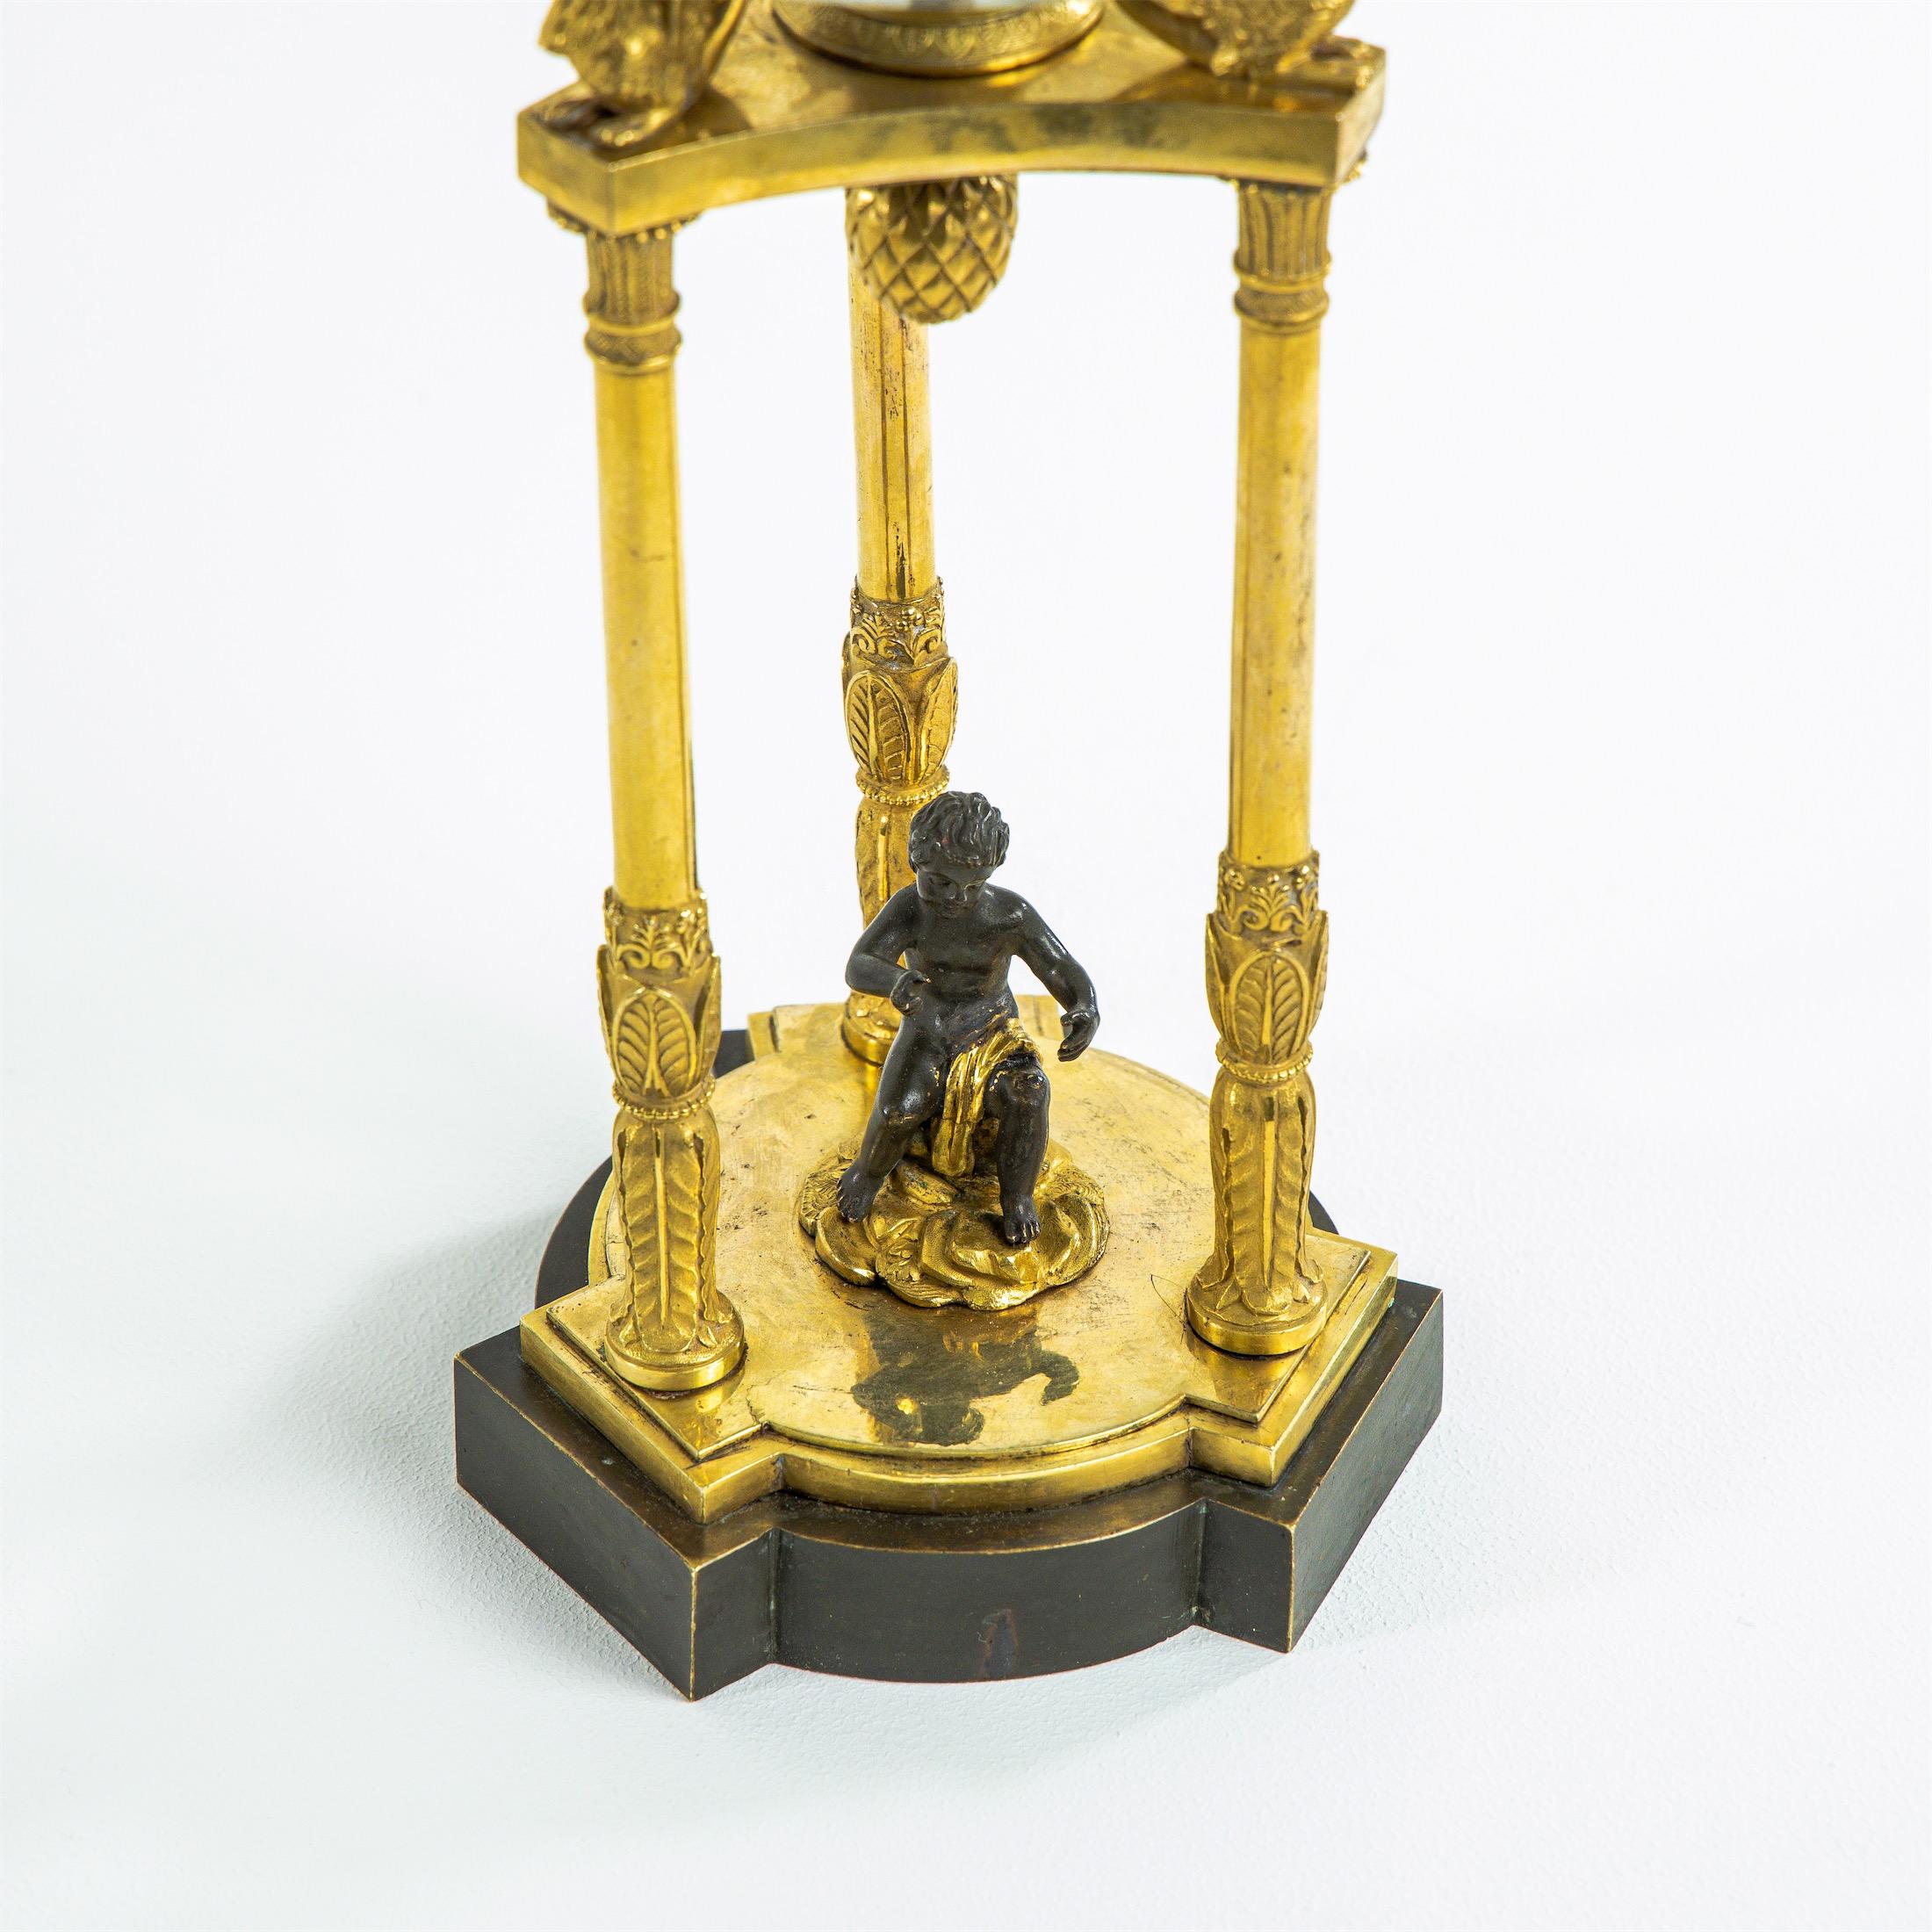 Empire Centerpiece with Putto Decor, Bronze and Glass, Early 19th Century For Sale 7